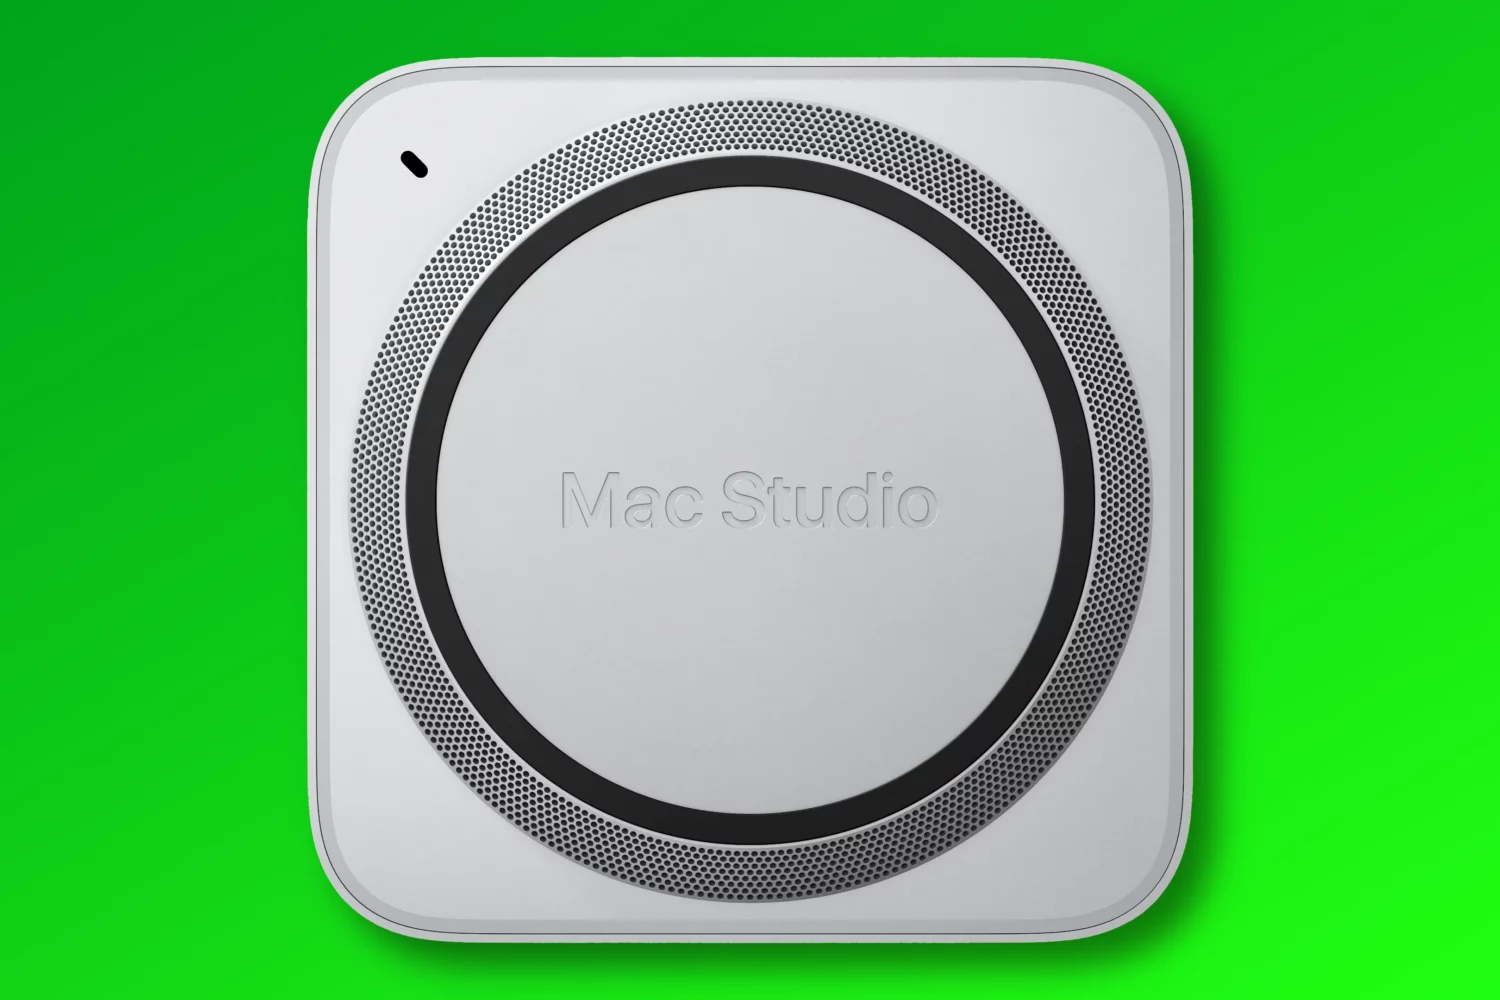 An image showing the bottom of Apple's Mac Studio desktop computer with a hole in the top left corner for a secure lock adapter, set against a blue gradient background